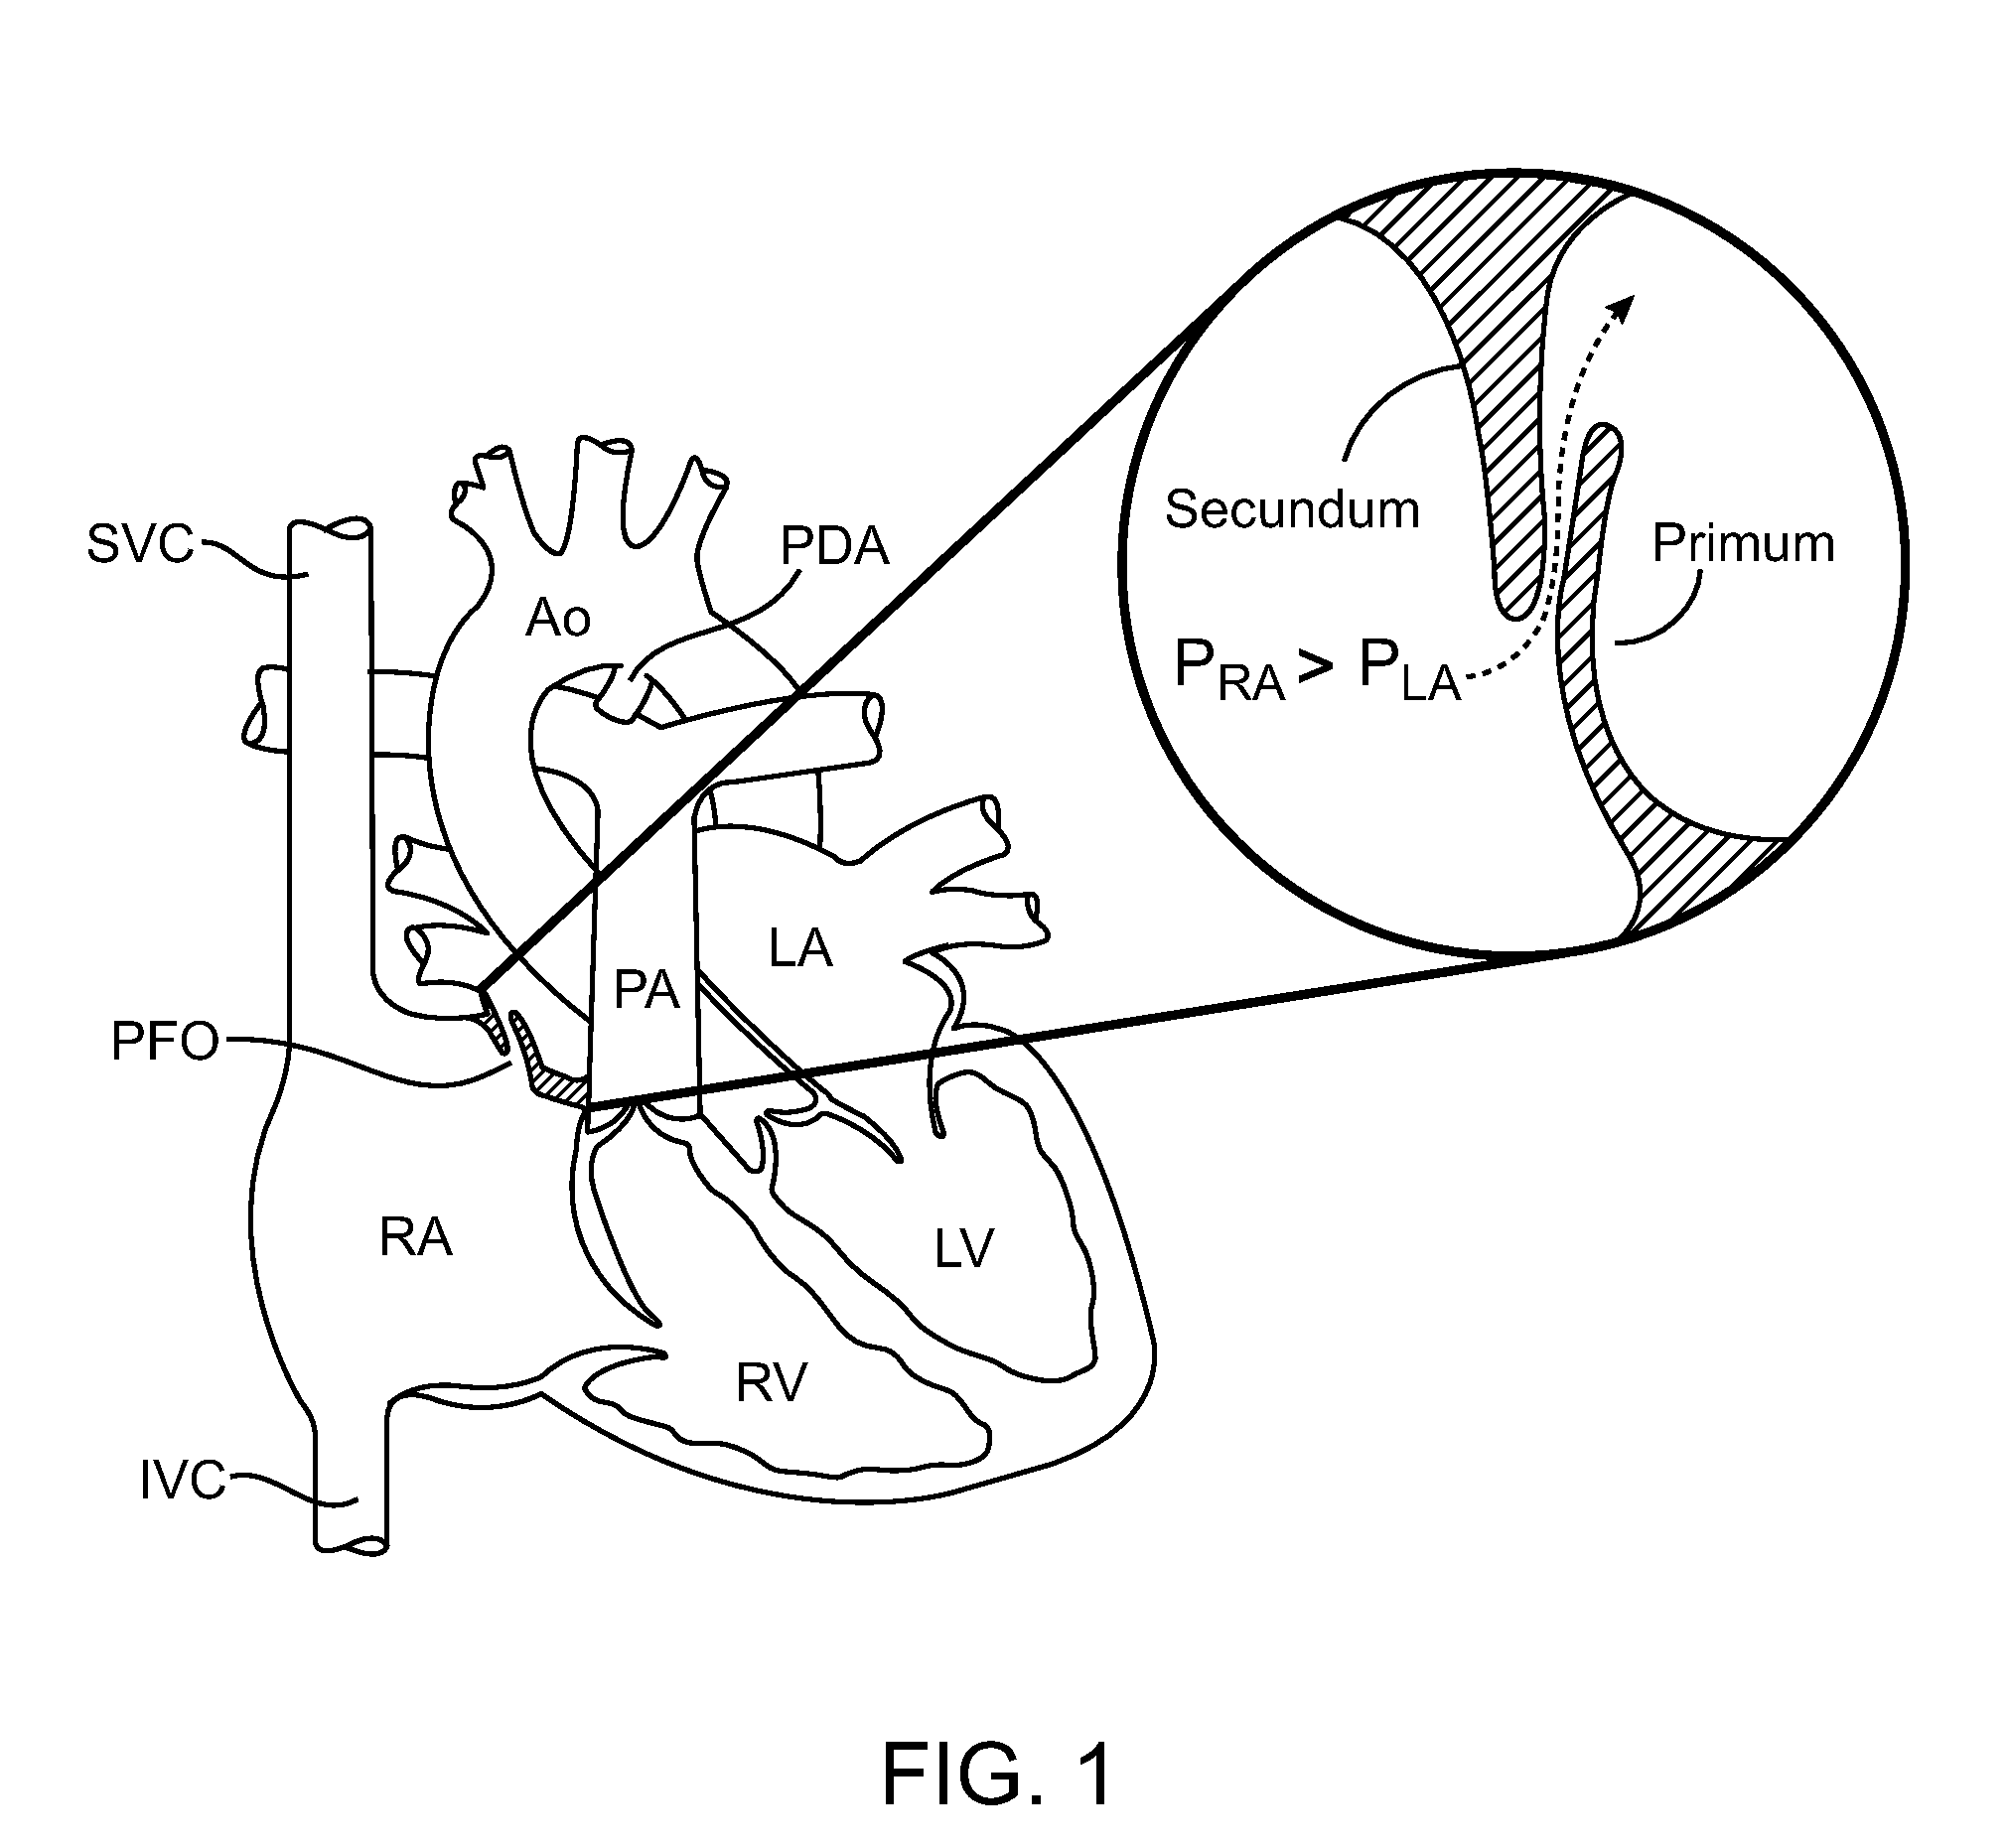 Multi-electrode apparatus for tissue welding and ablation